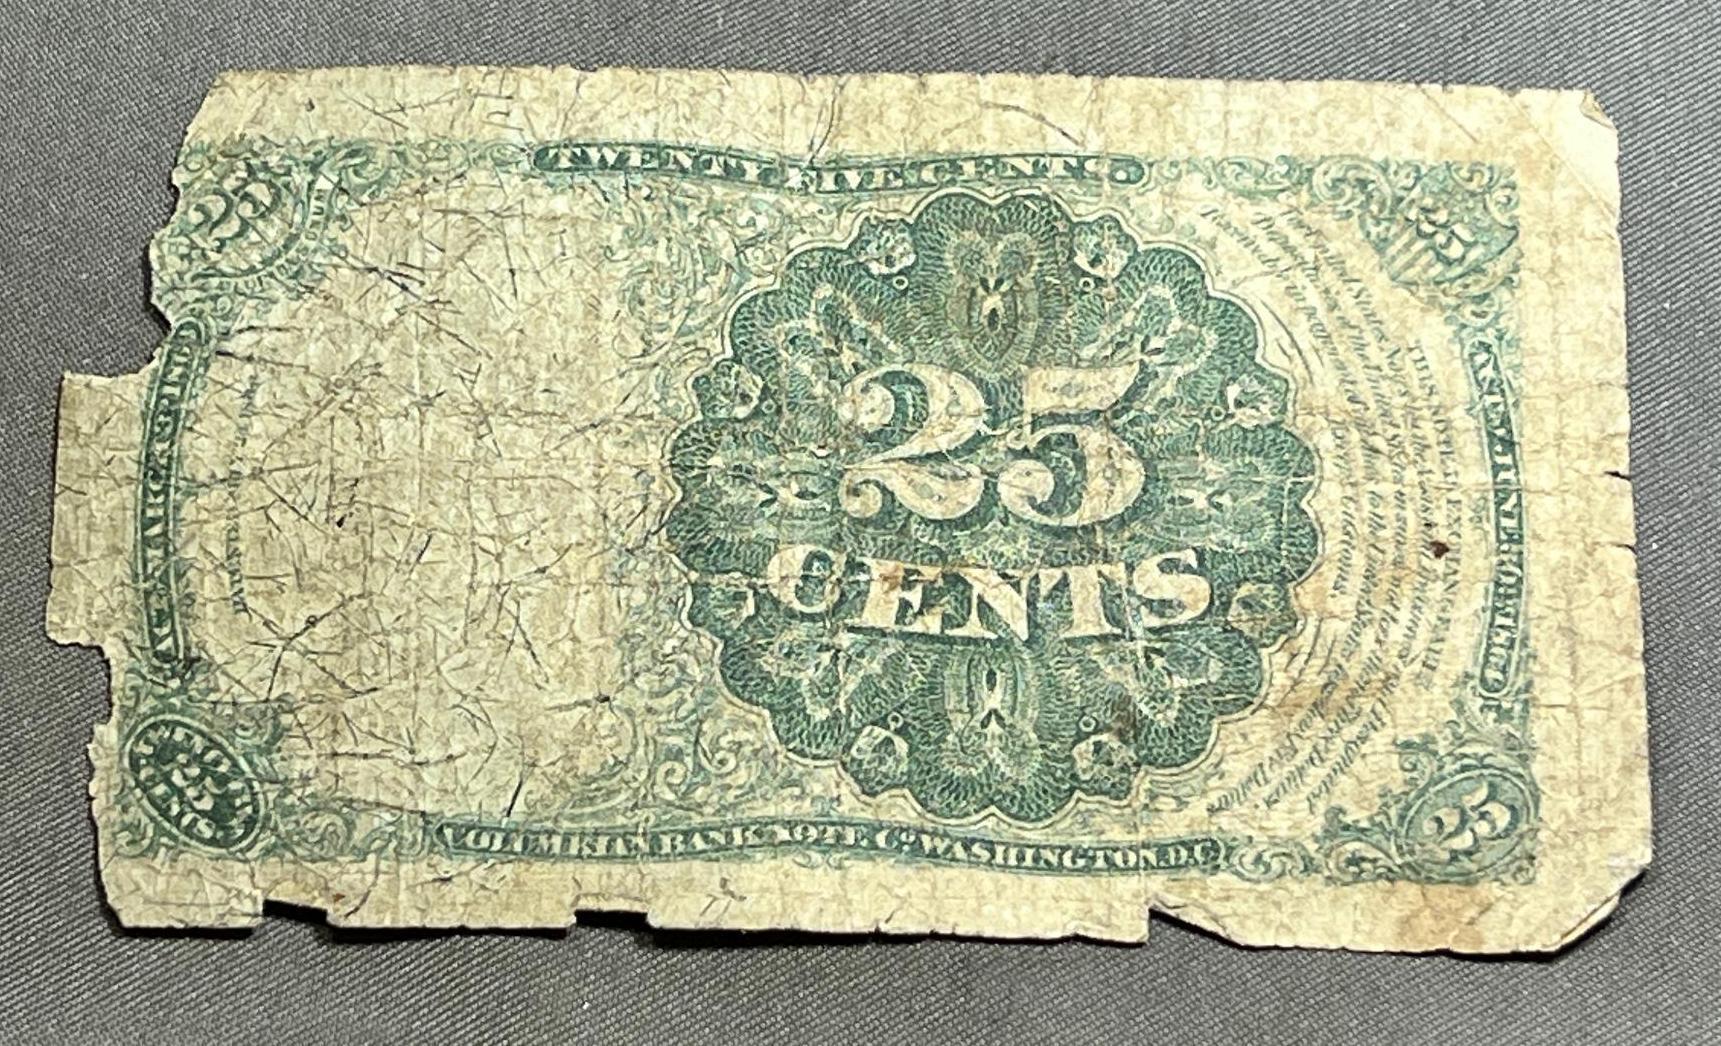 1874 25 CENT Fraction Currency Note